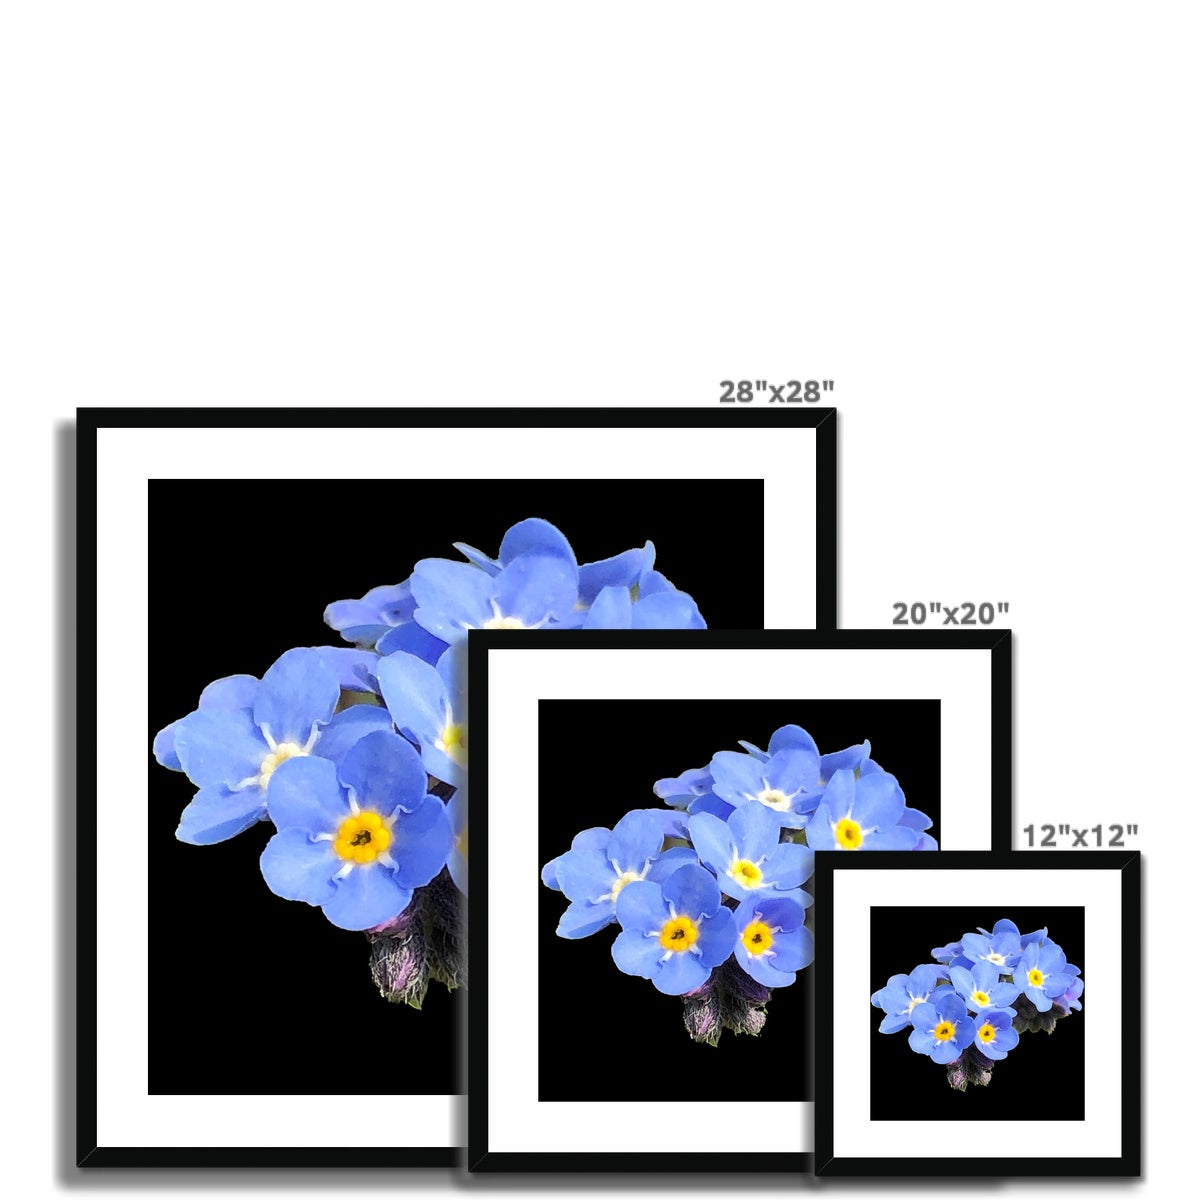 Forget me Not Print Framed & Mounted Print